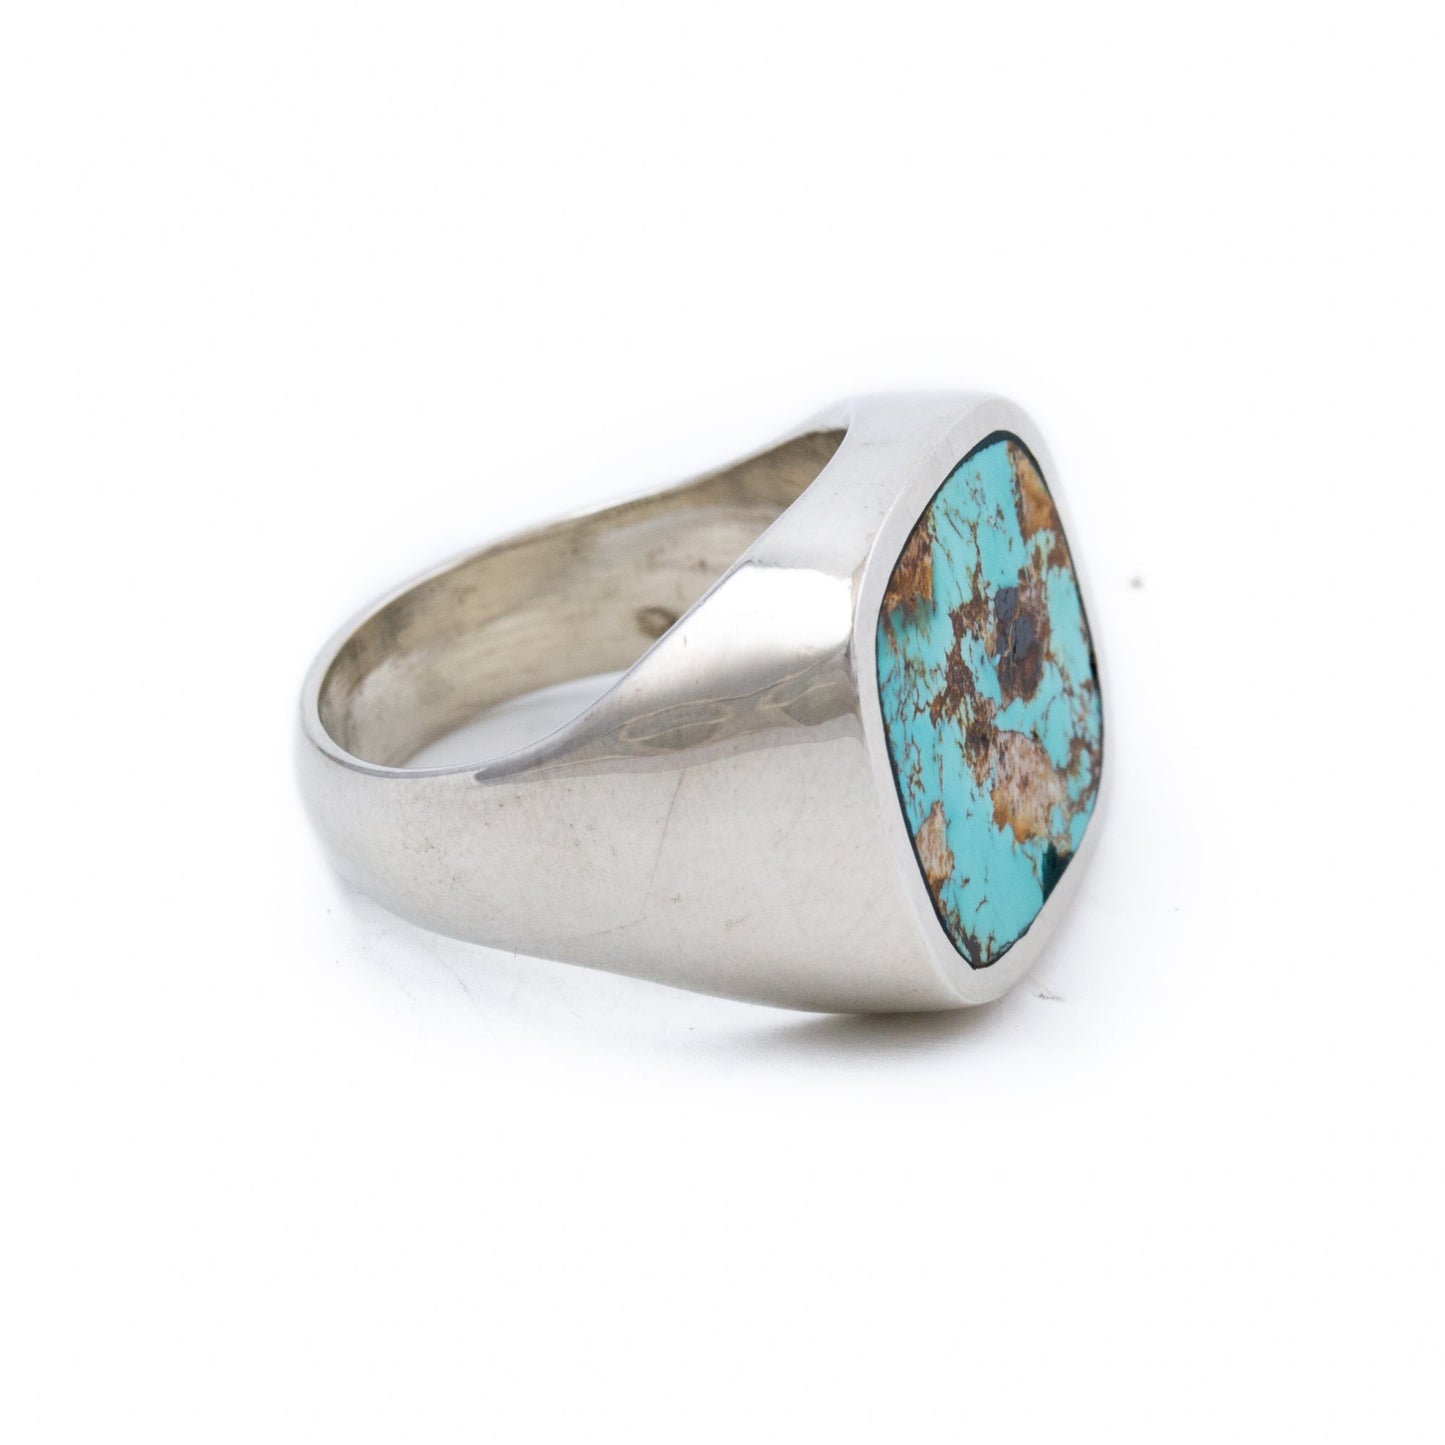 High Quality Royston Turquoise Inlay Signet Ring - Kingdom Jewelry